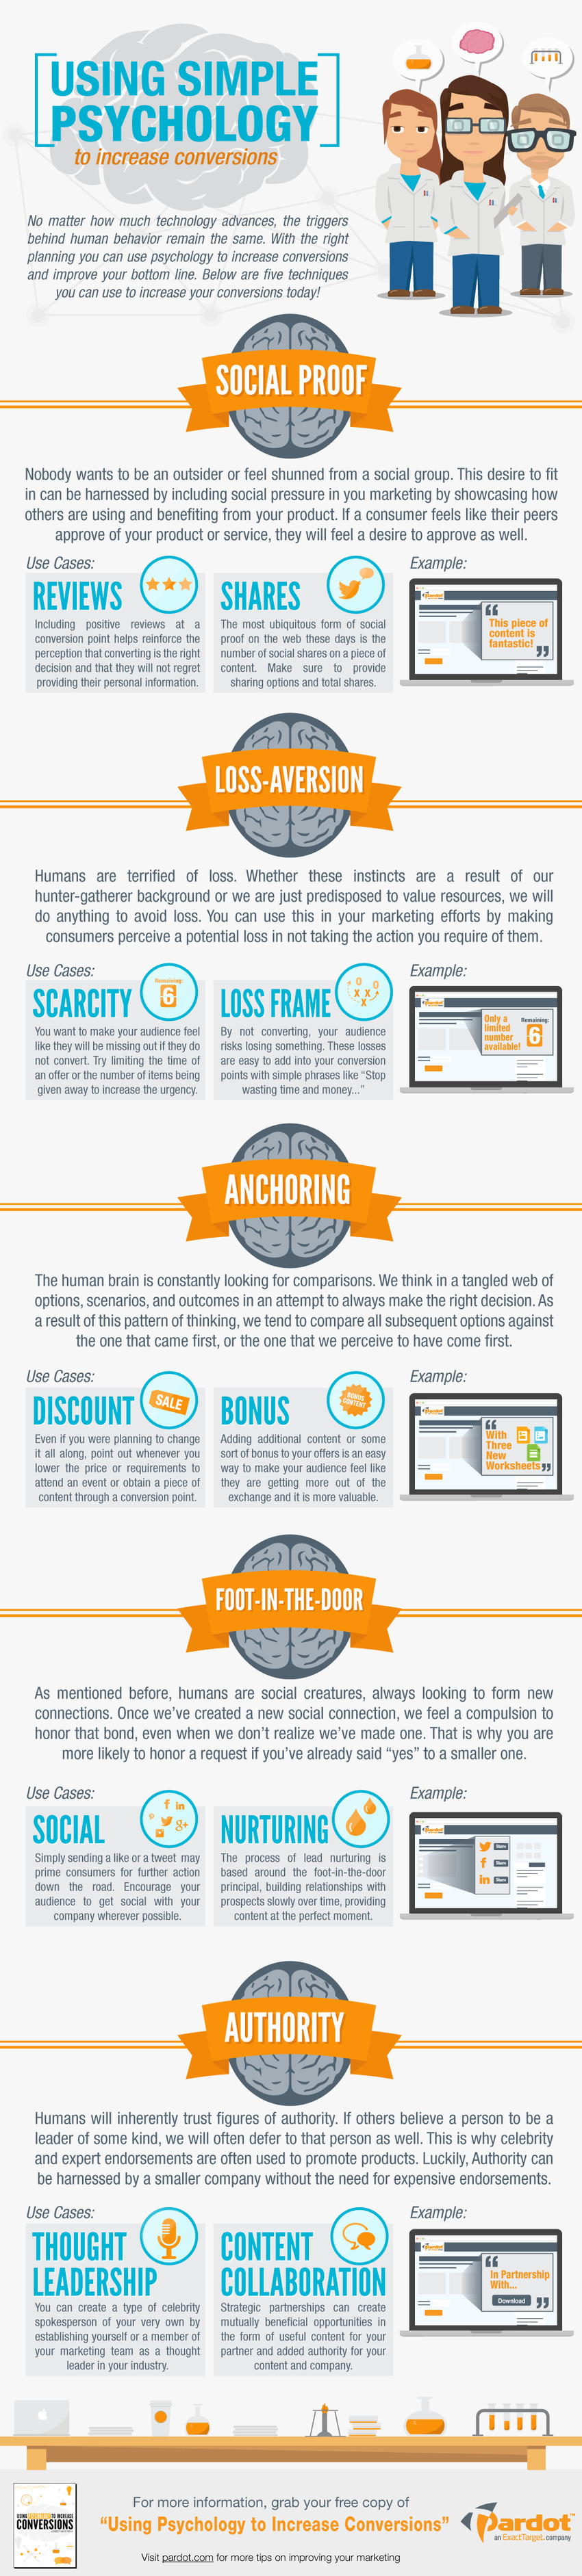 The Psychology of Conversions [INFOGRAPHIC] - Pardot | The MarTech Digest | Scoop.it